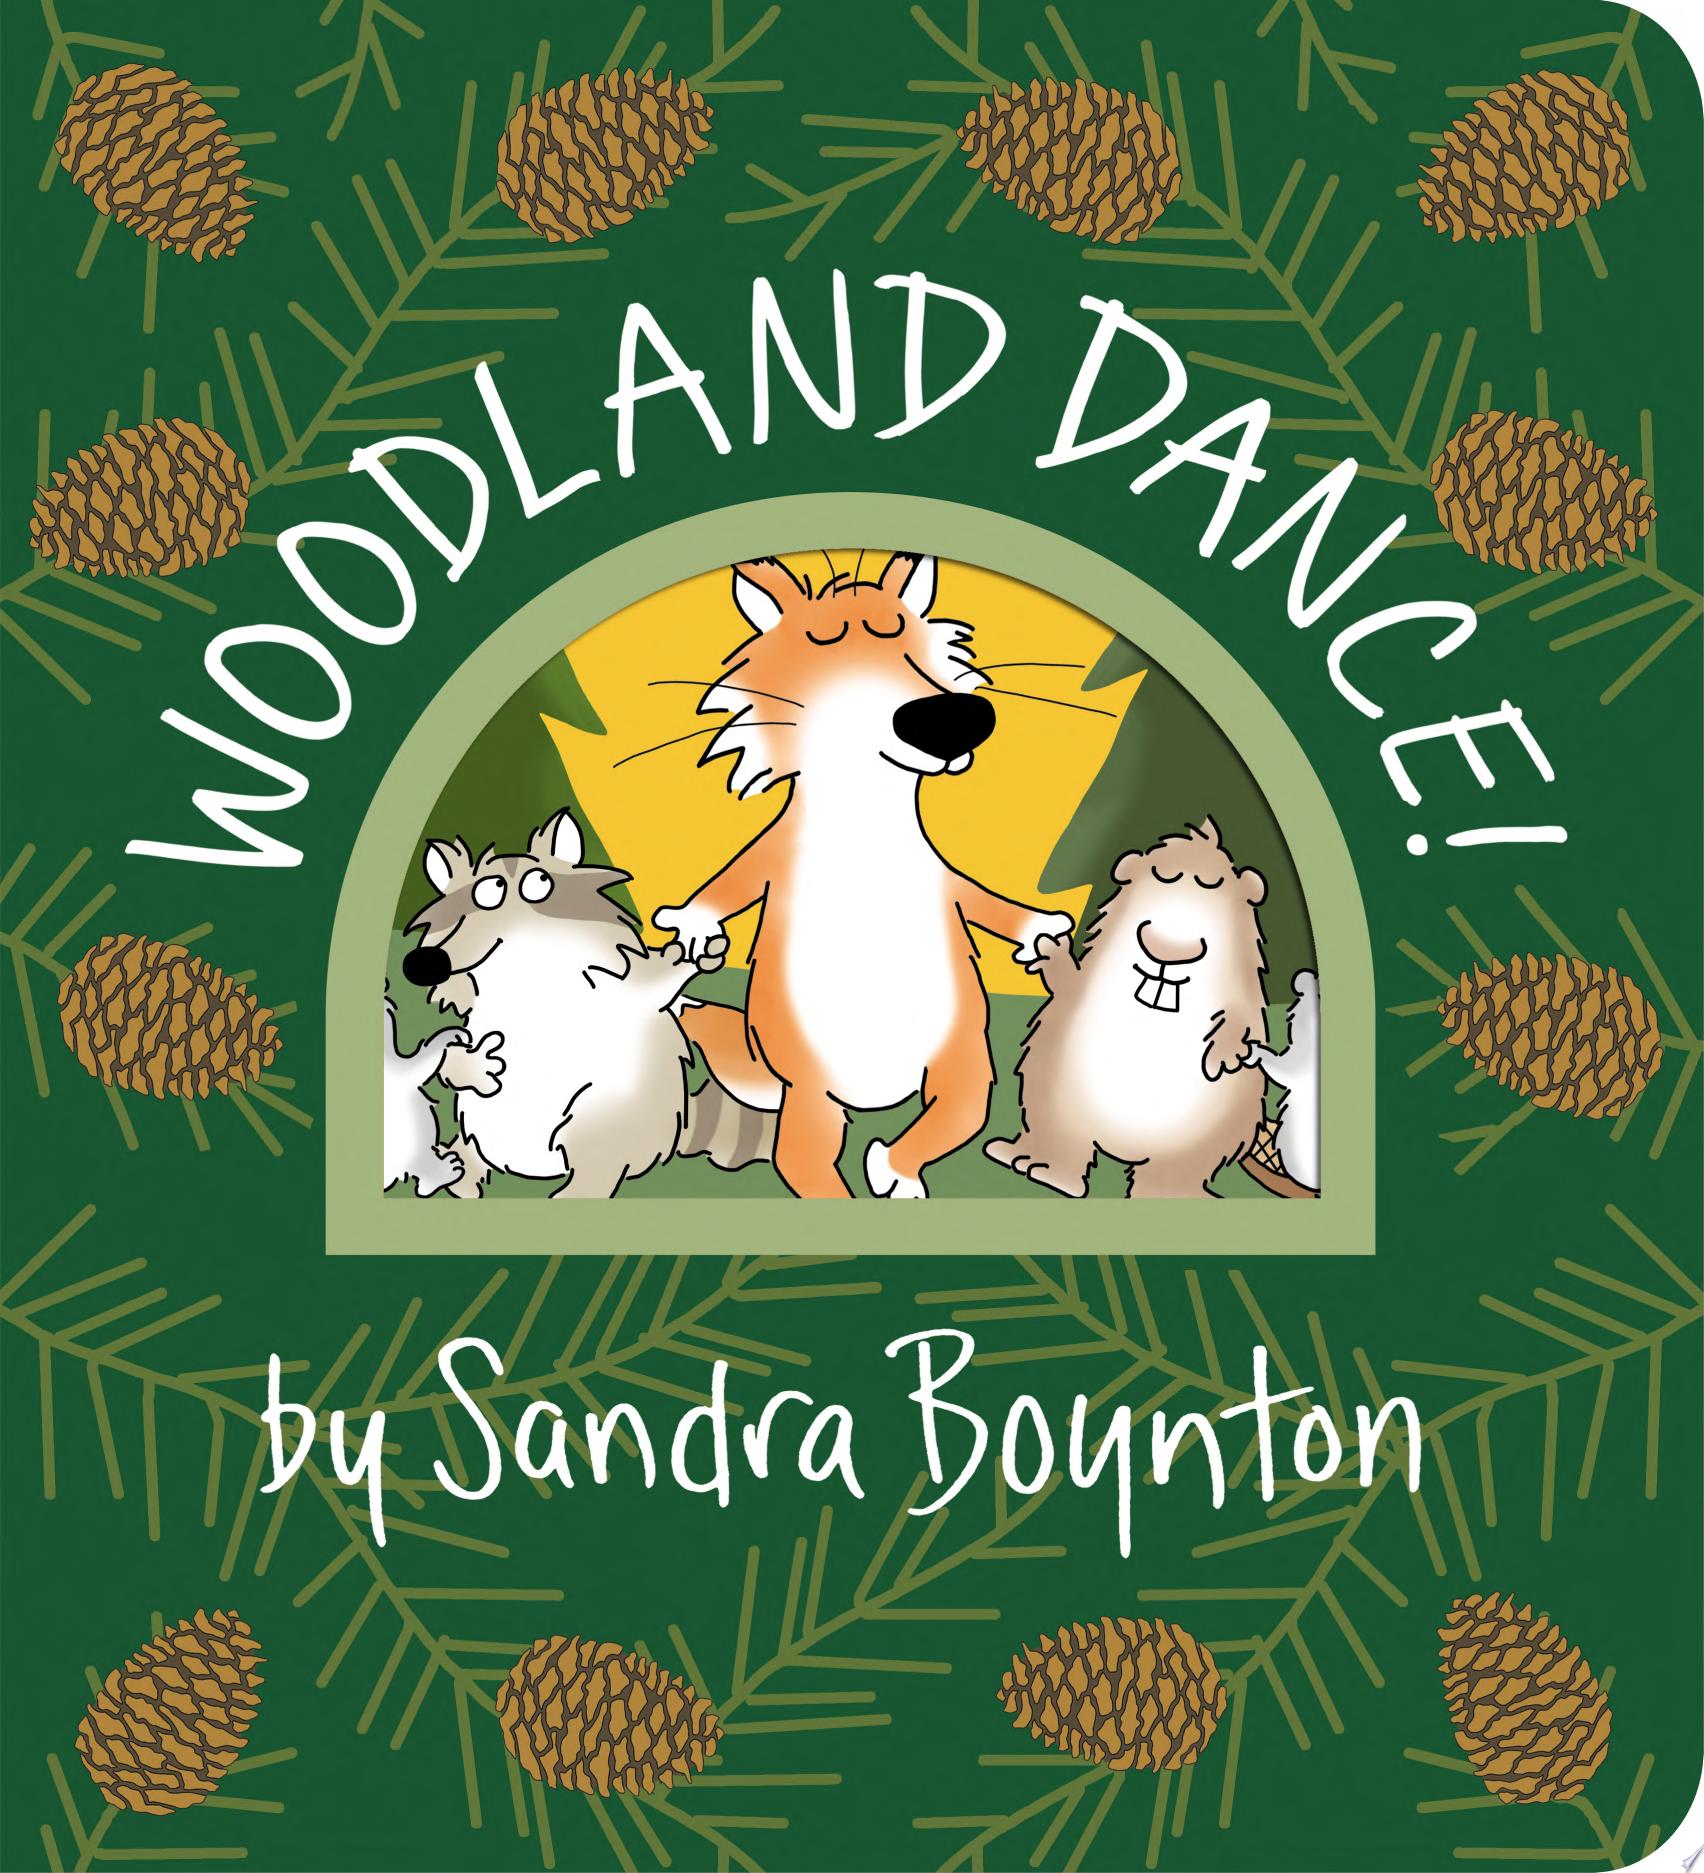 Image for "Woodland Dance!"